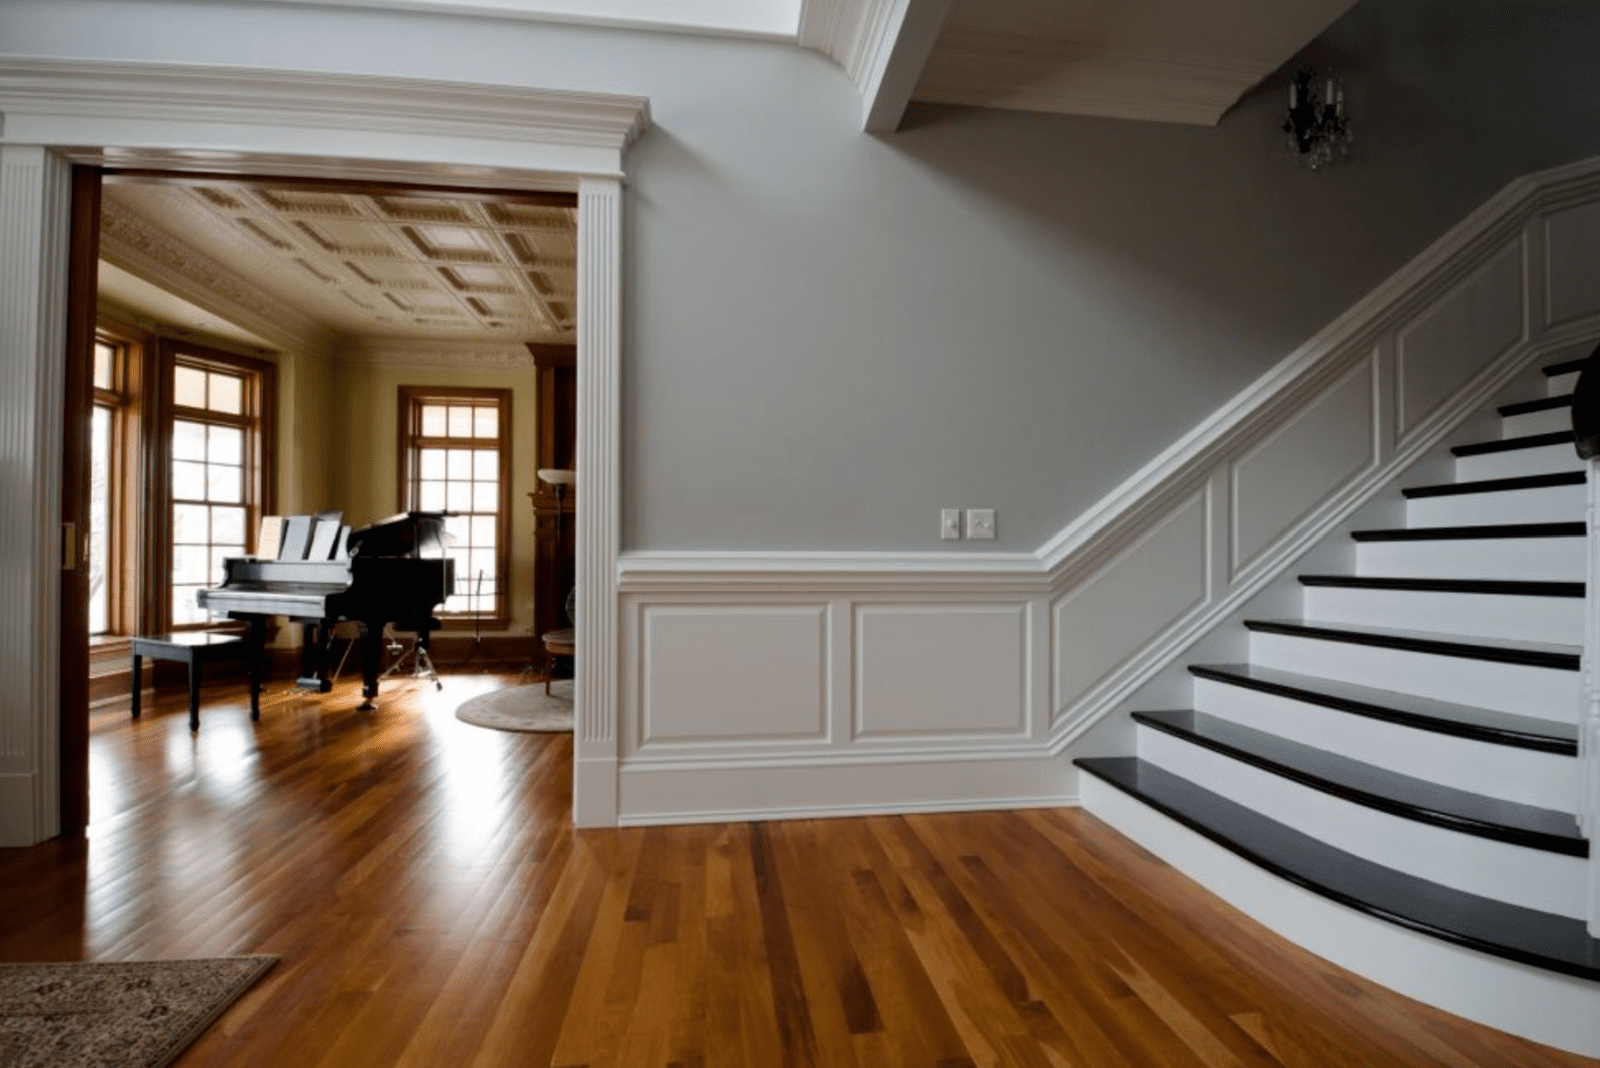 Interior custom painting service. Entry and staircase..